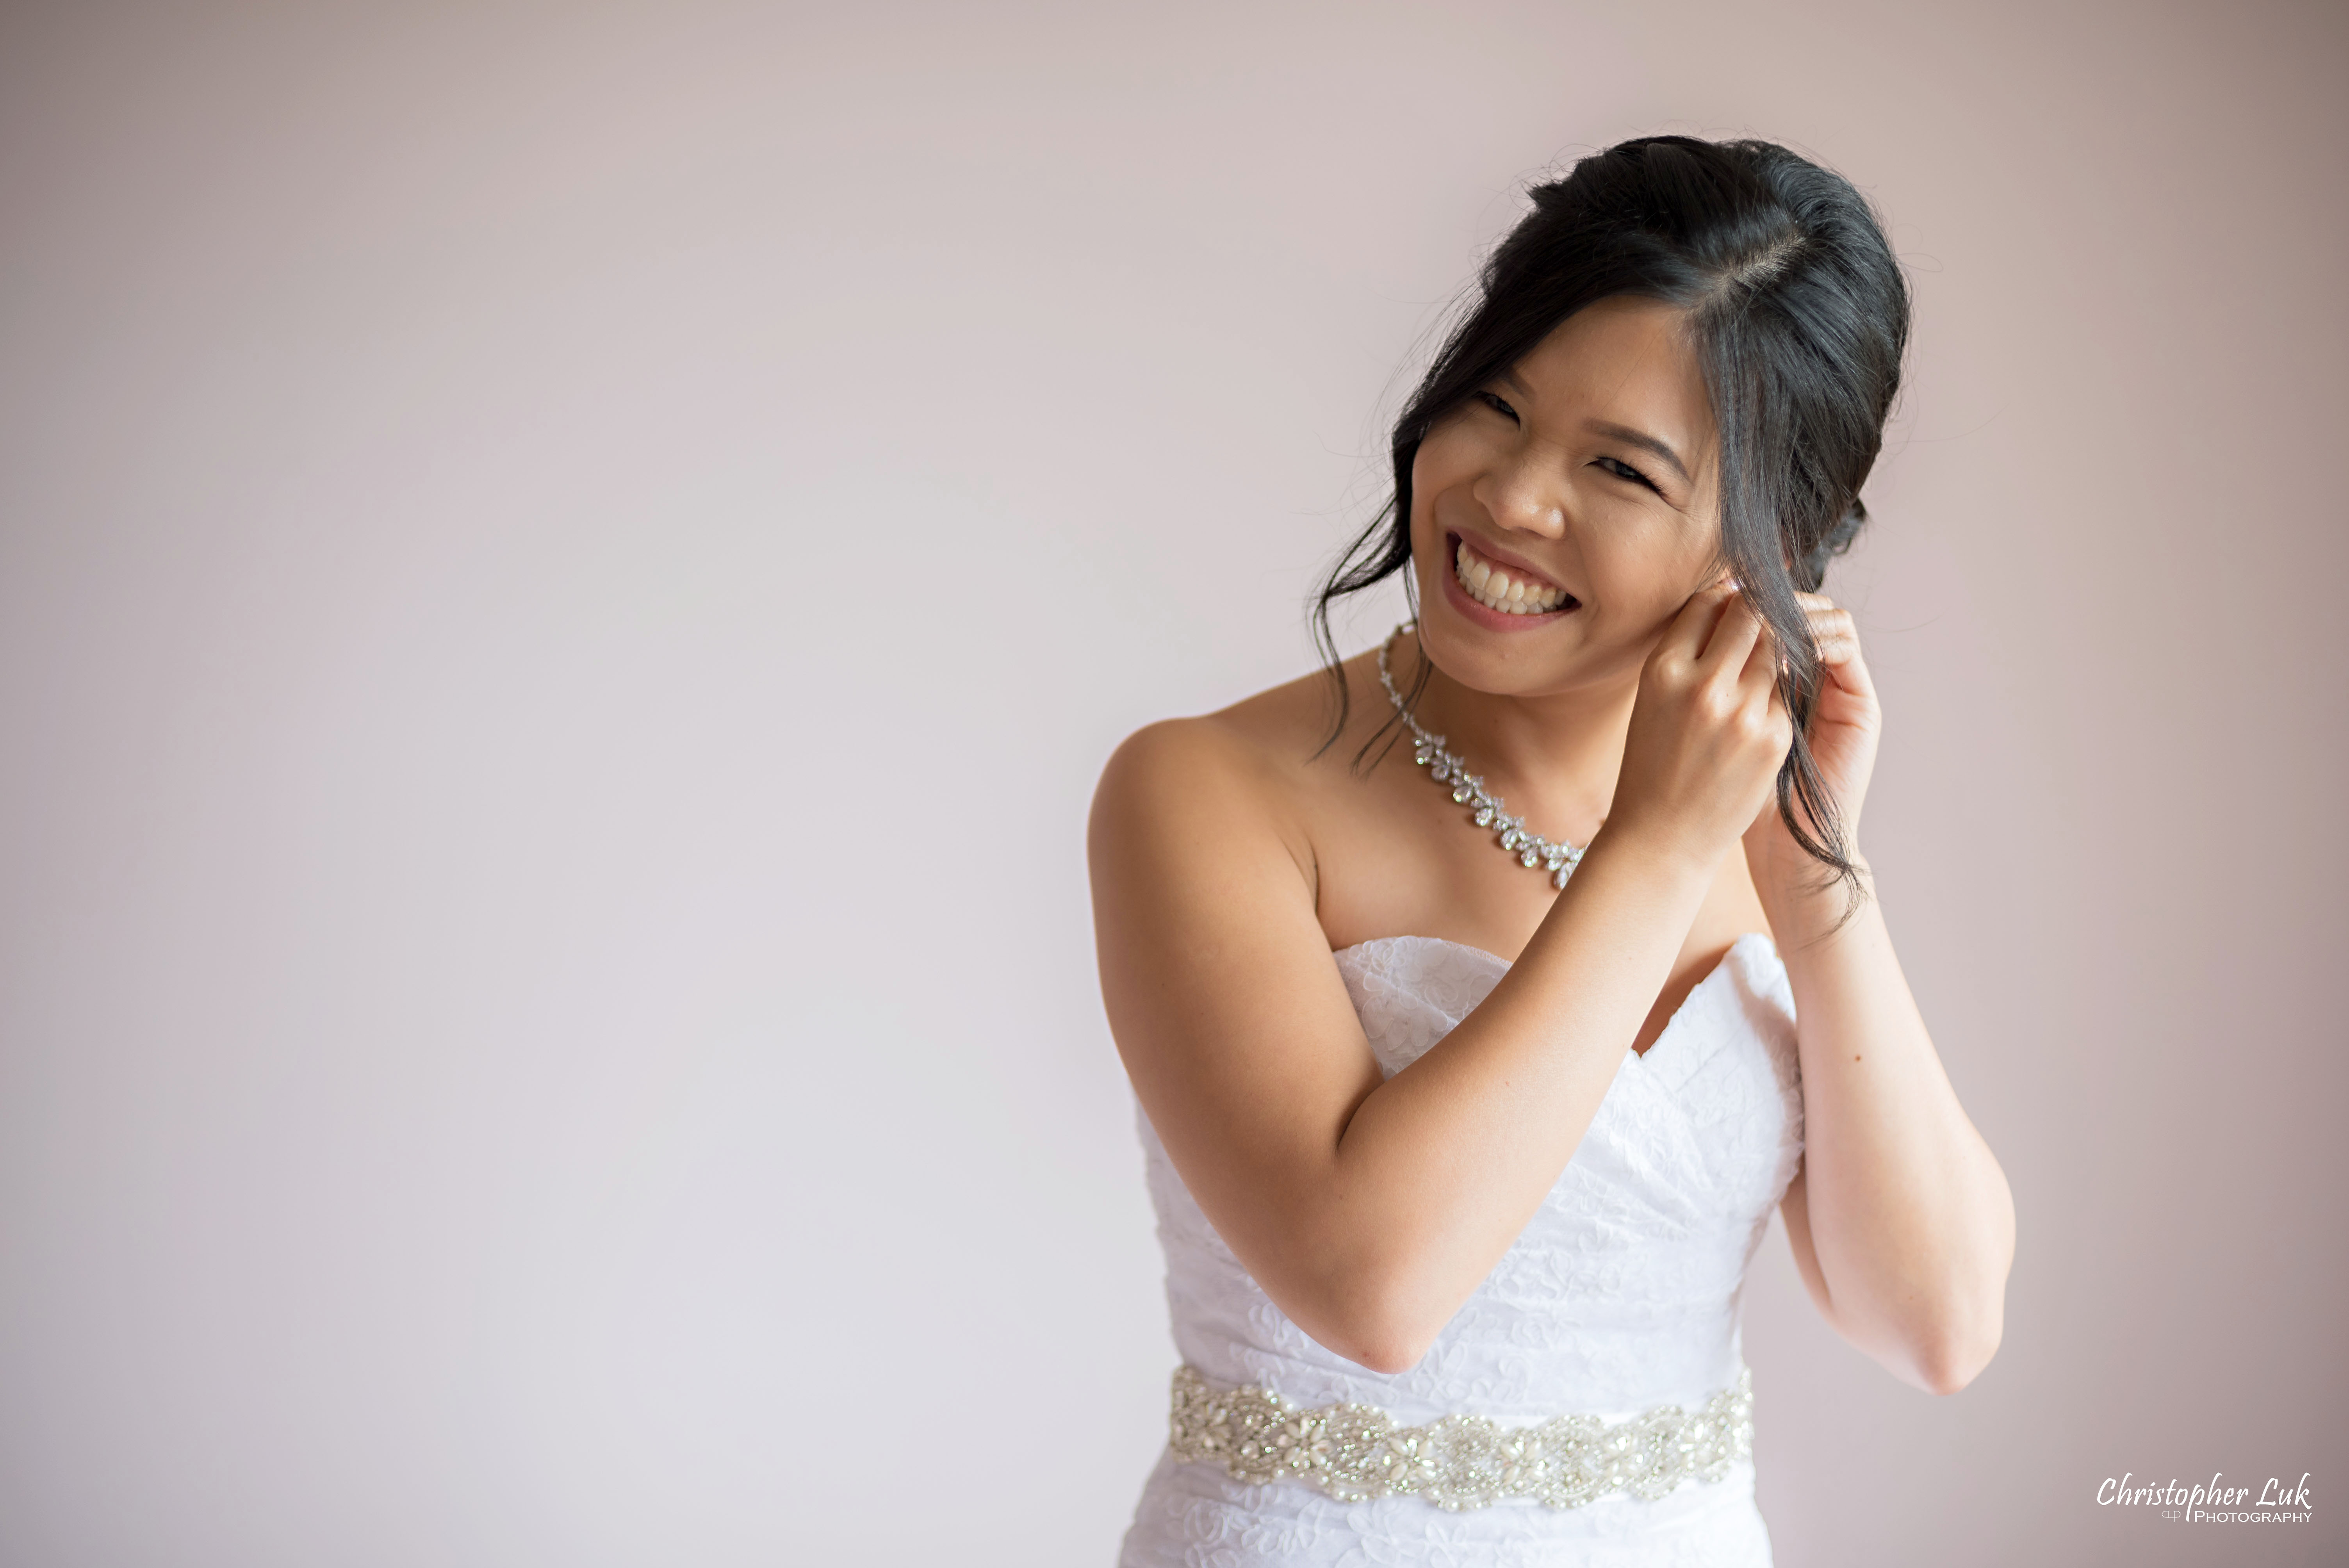 Christopher Luk - Toronto Wedding Photographer - Markham Home Private Residence Bride Alfred Angelo from Joanna’s Bridal Natural Candid Photojournalistic Creative Portrait Earrings Smile